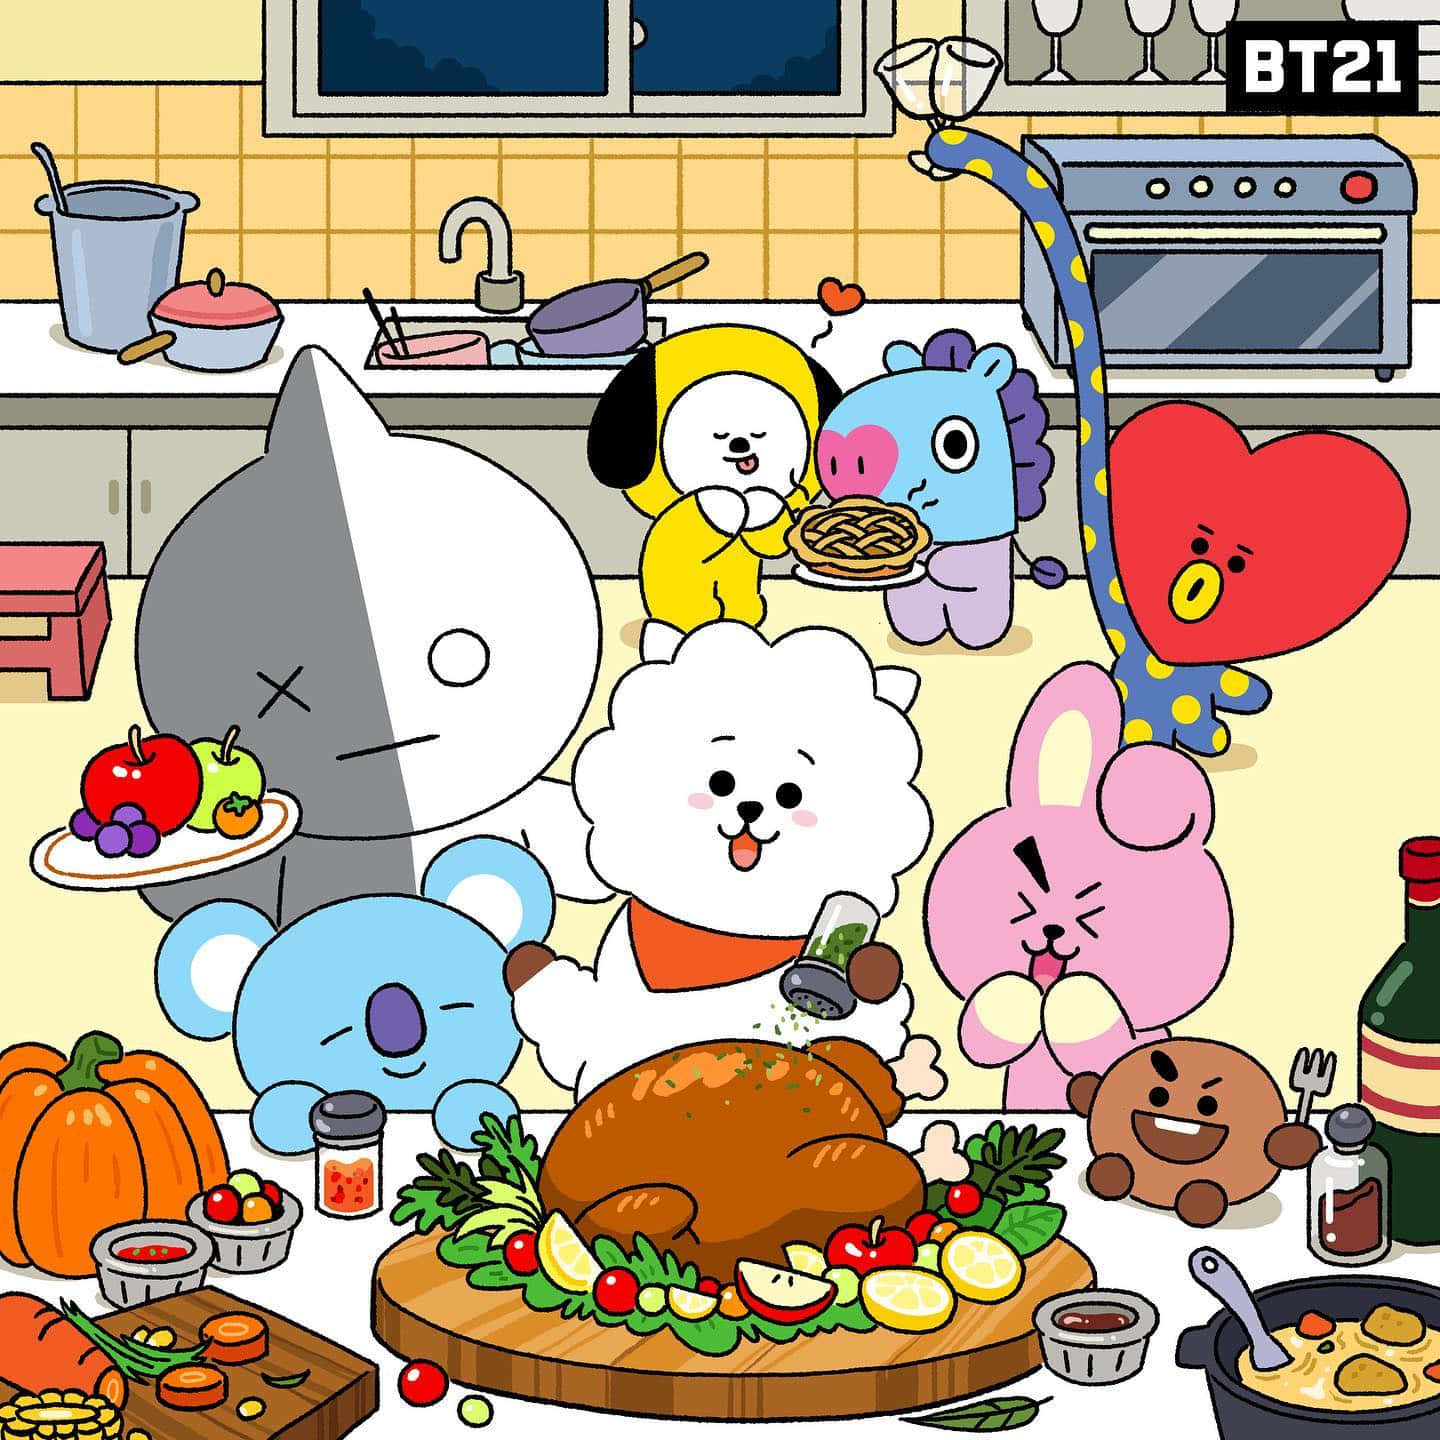 BT21 Characters on a Colorful Universe Background